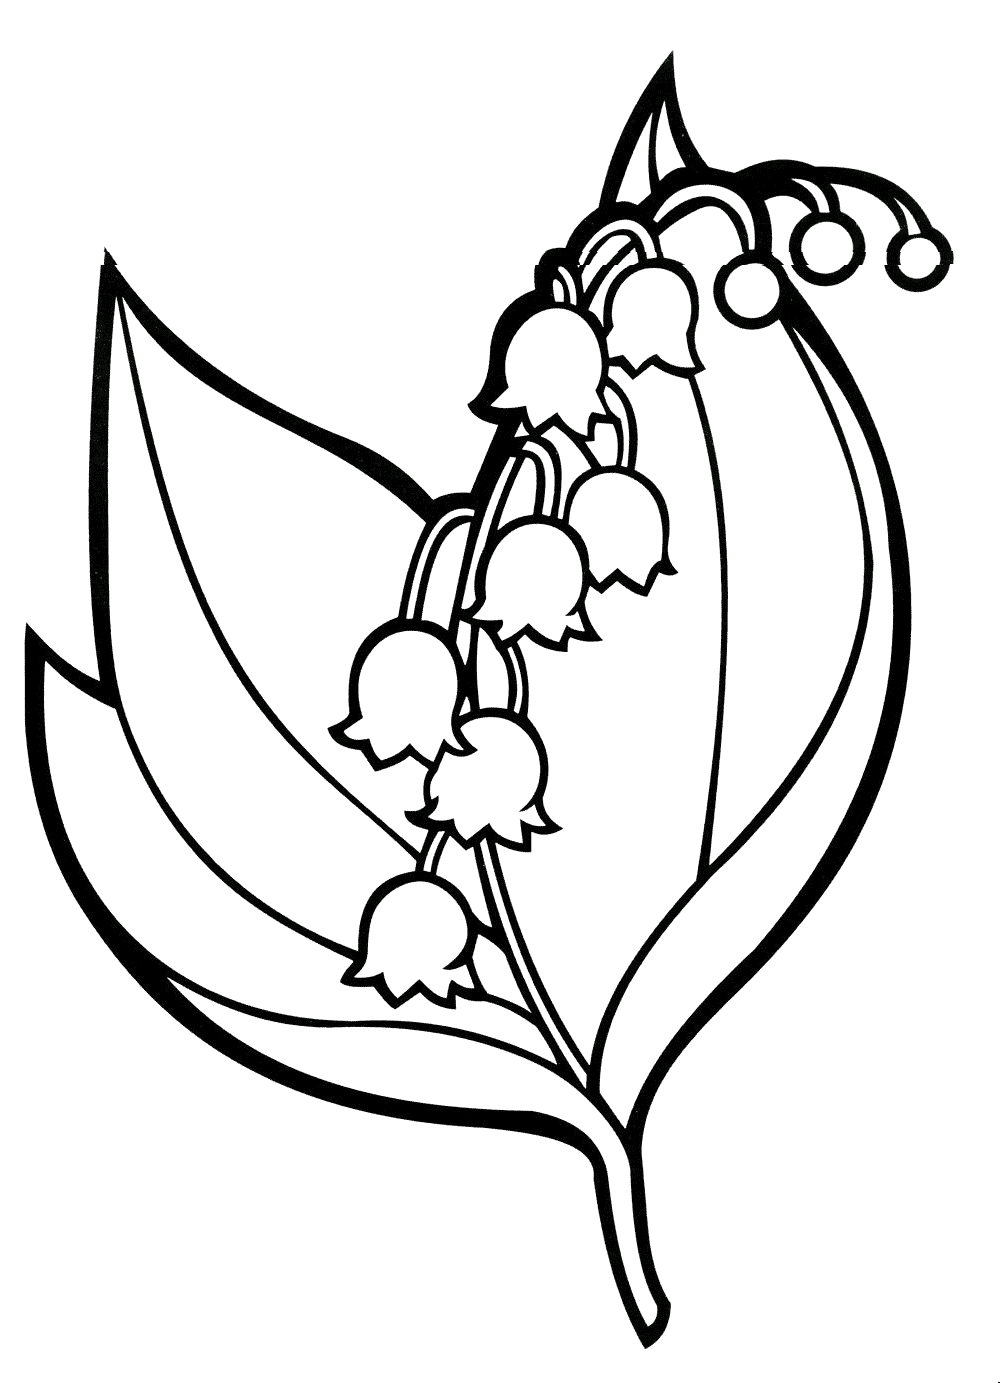 Lily Of The Valley Coloring Page Lily Of The Valley Drawing Free Download Best Lily Of The Valley